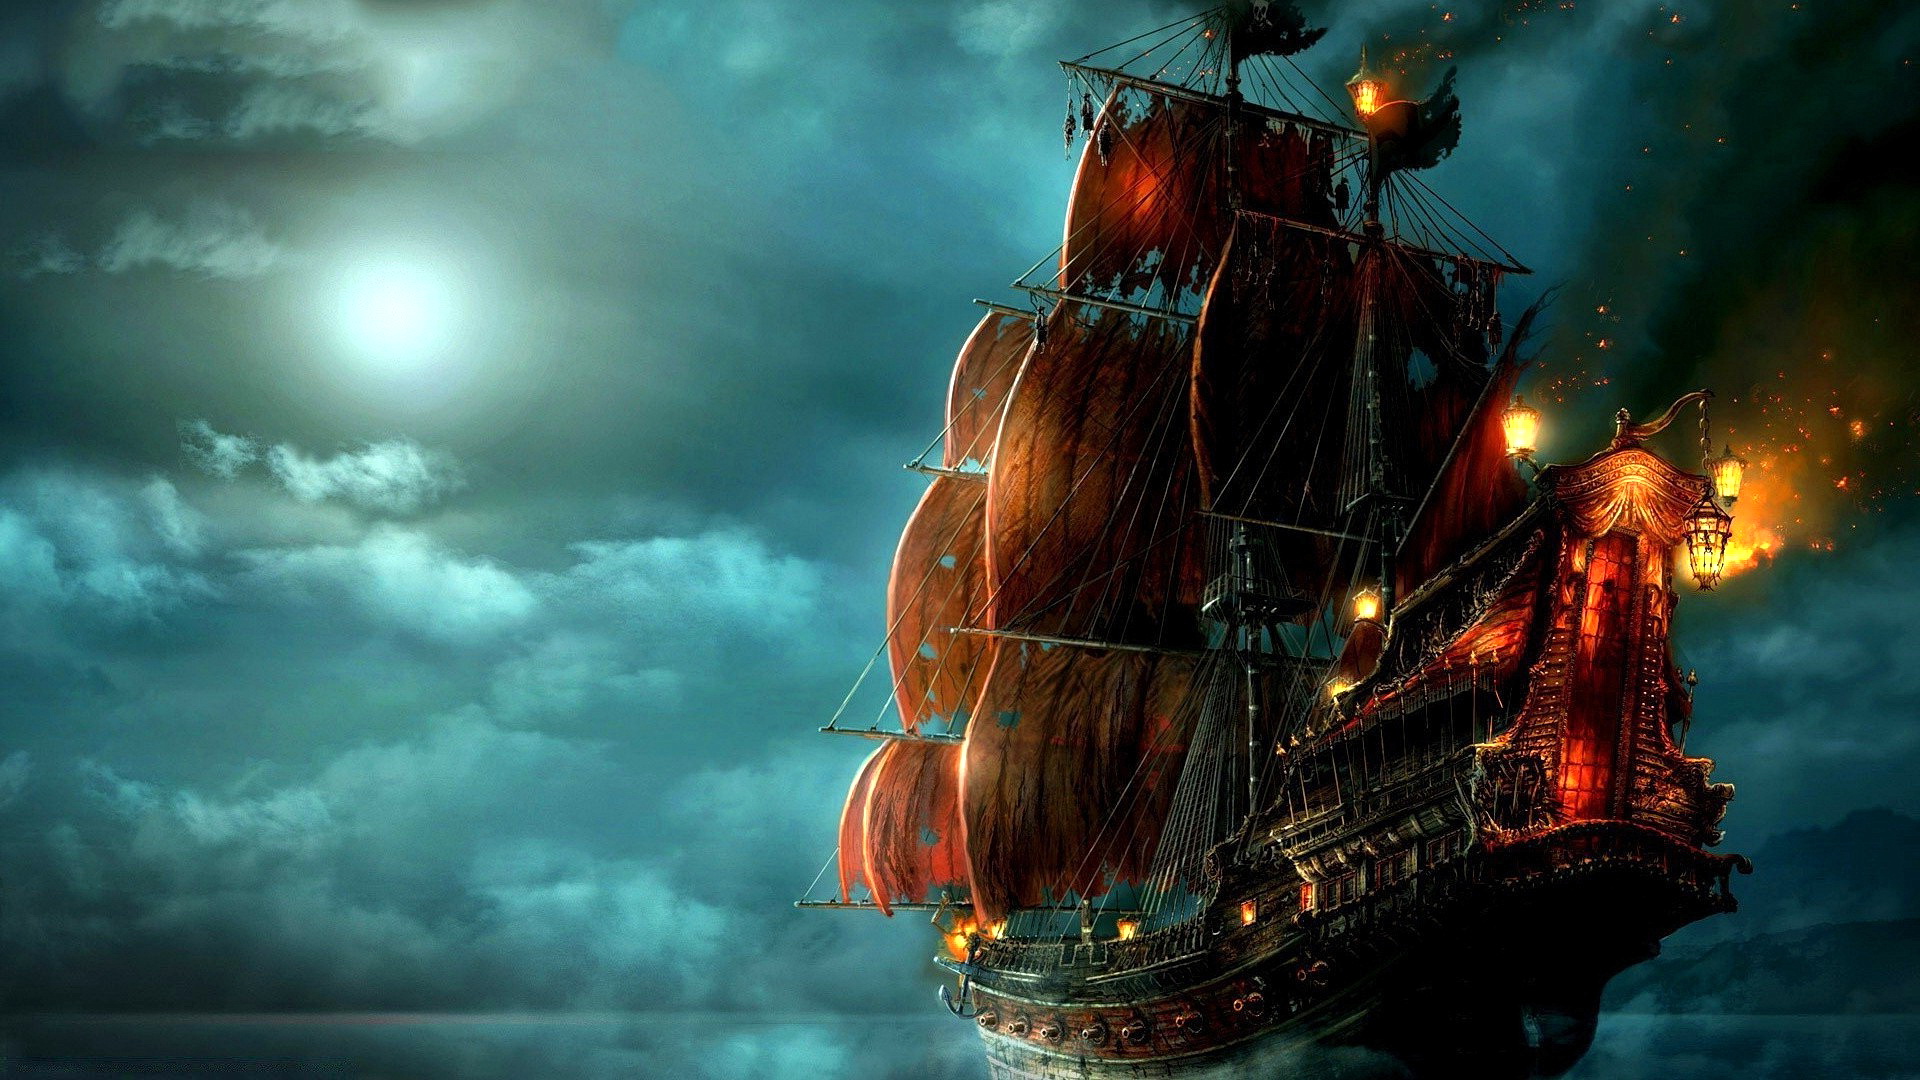 Free photo Pirate ship in the background of the night sky